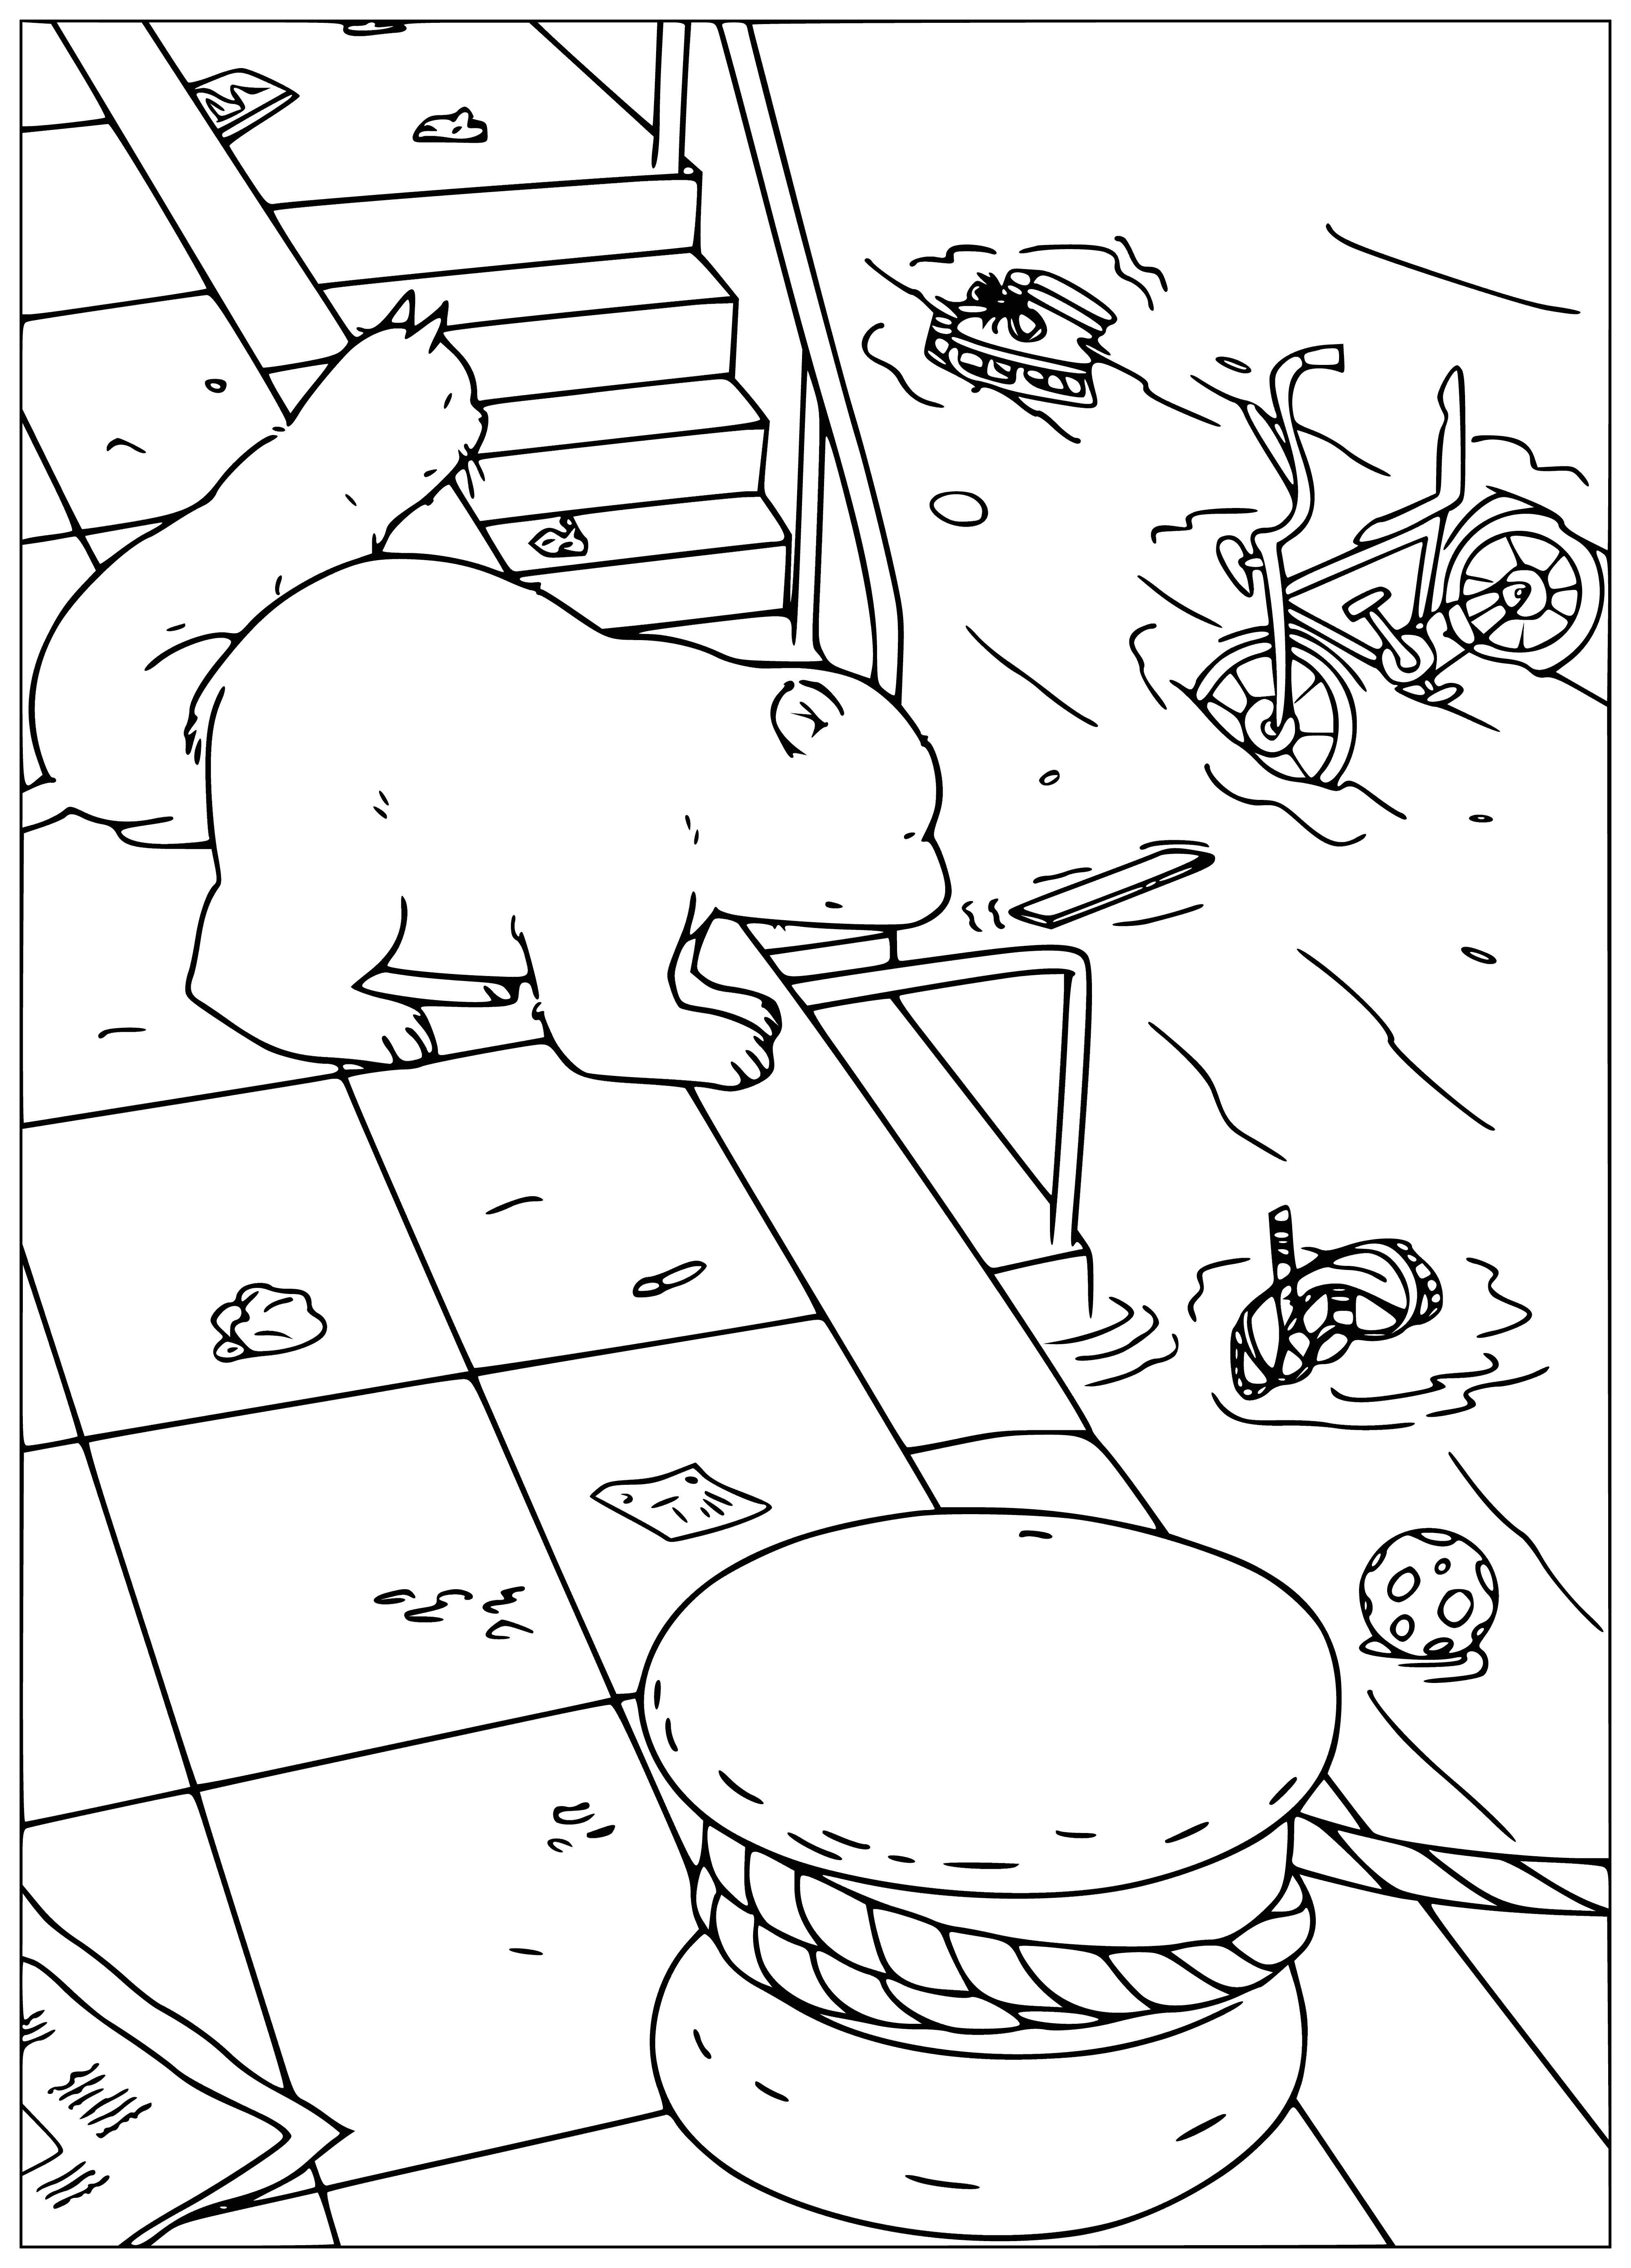 coloring page: Lars is a curious polar bear who loves to explore. He ventures to the city, where he admires all the sights and takes a bus ride!